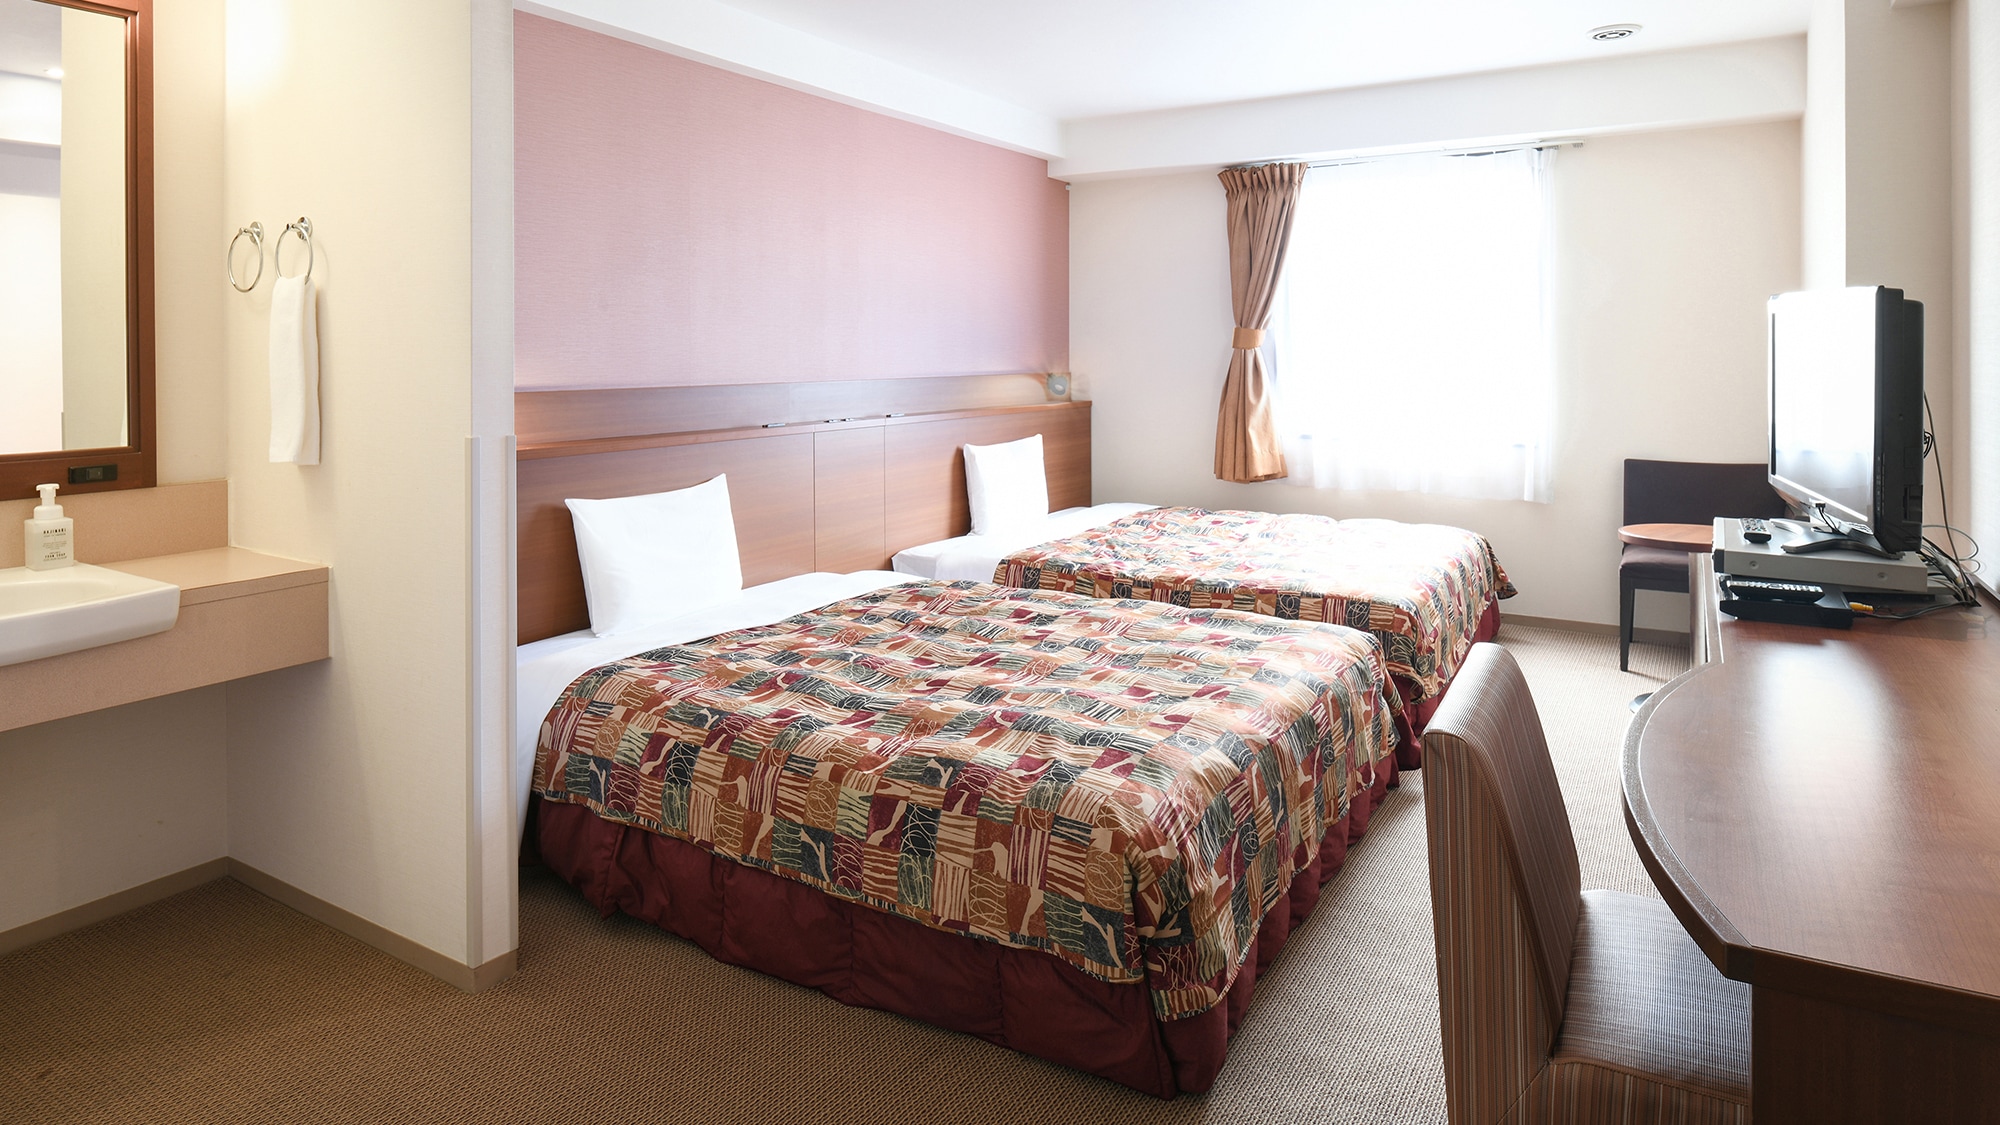 This room has two 150cm wide double beds.